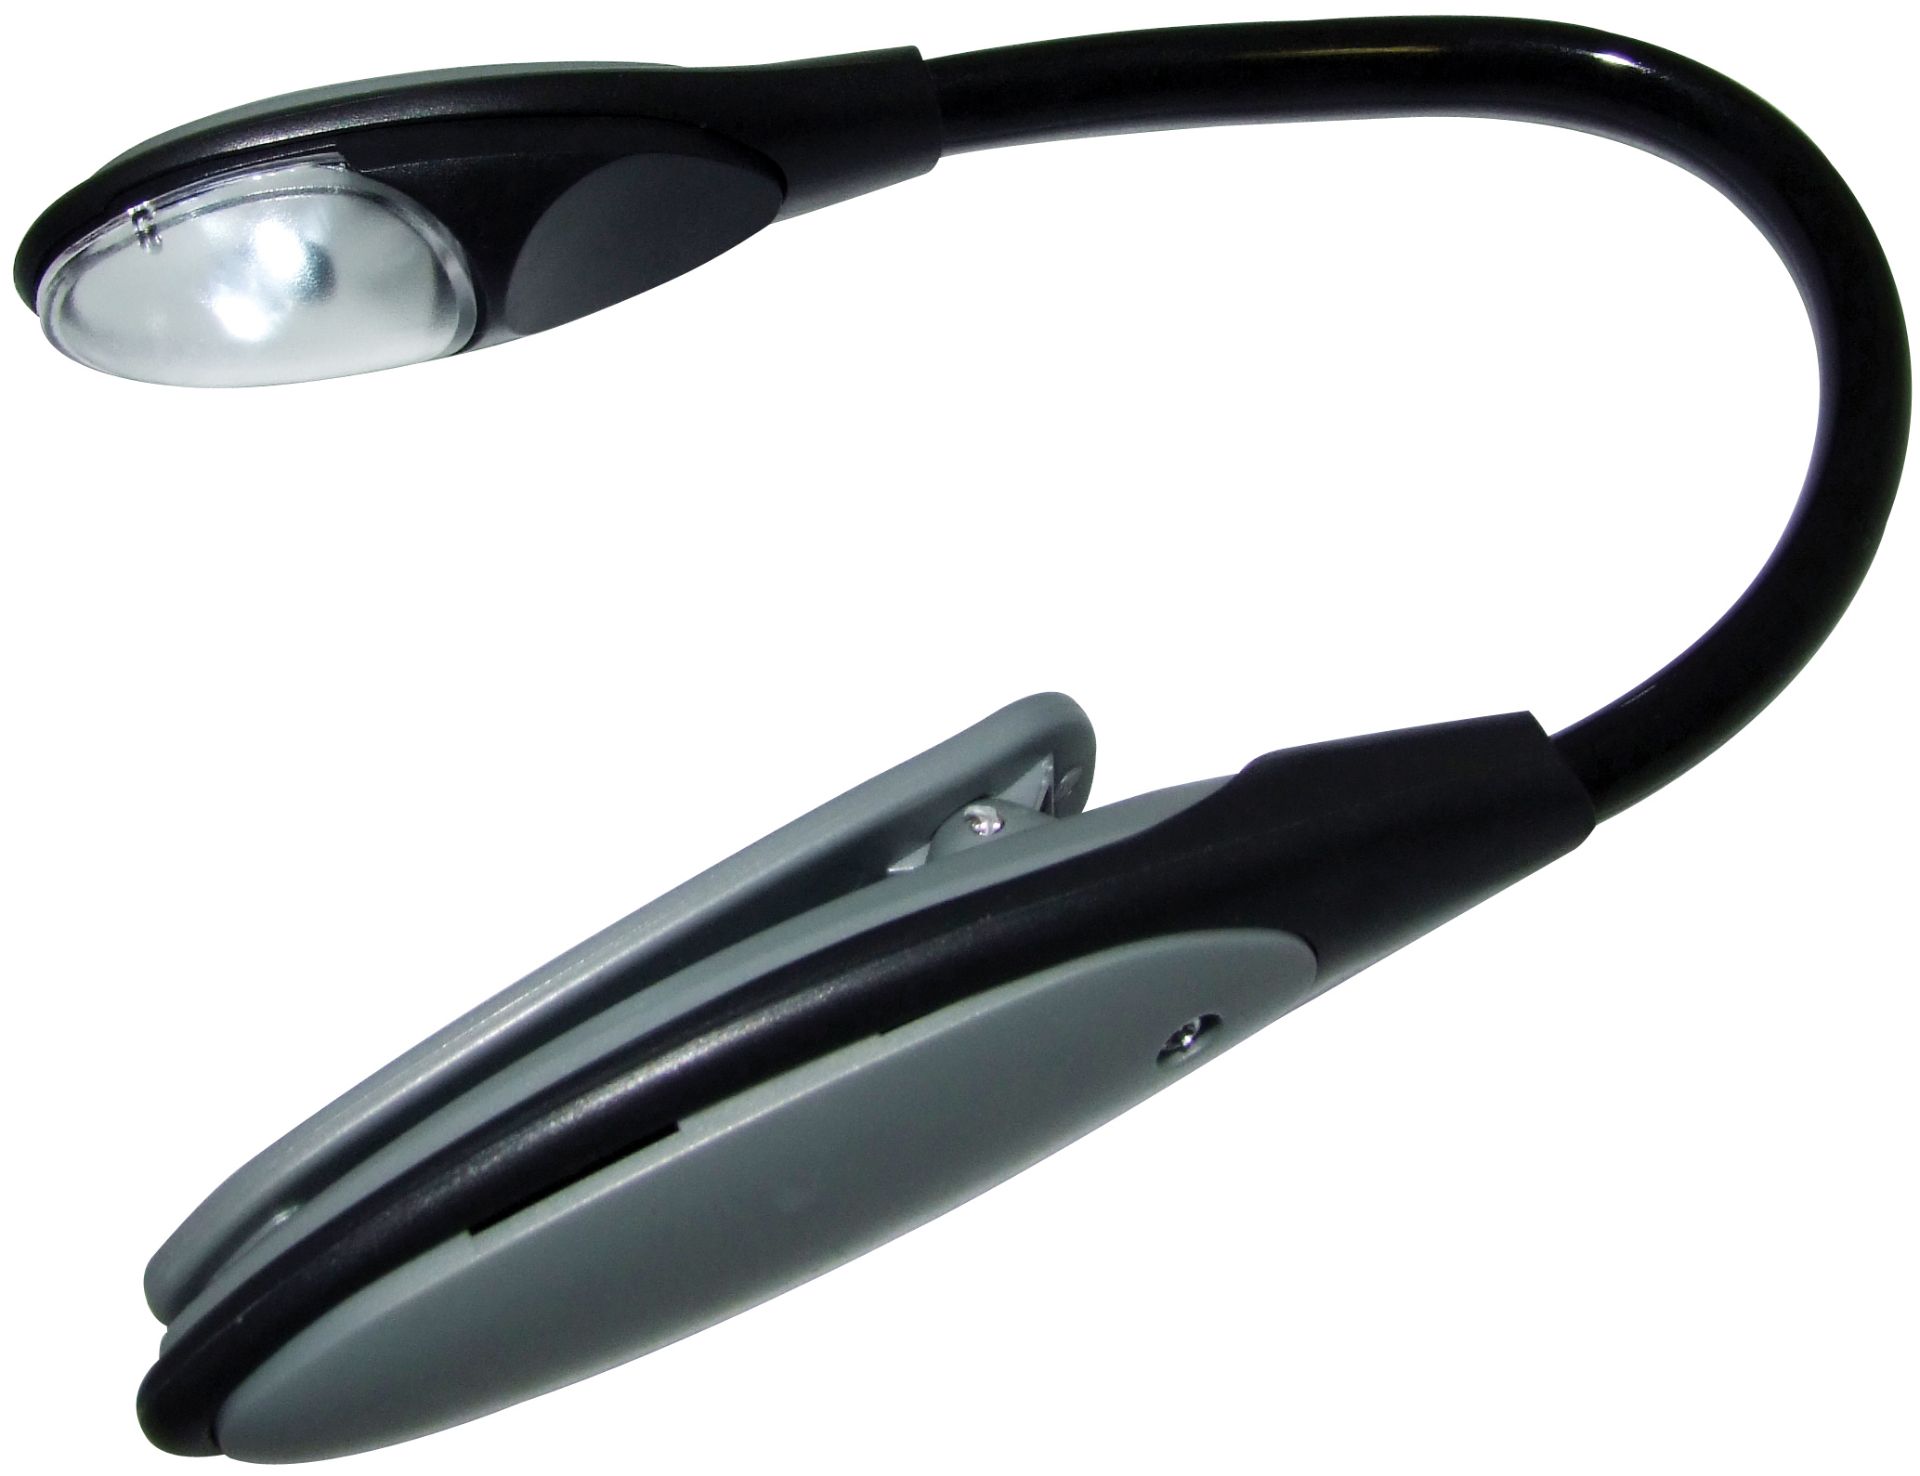 V *TRADE QTY* Brand New Flexible LED Clip Light X 8 YOUR BID PRICE TO BE MULTIPLIED BY EIGHT